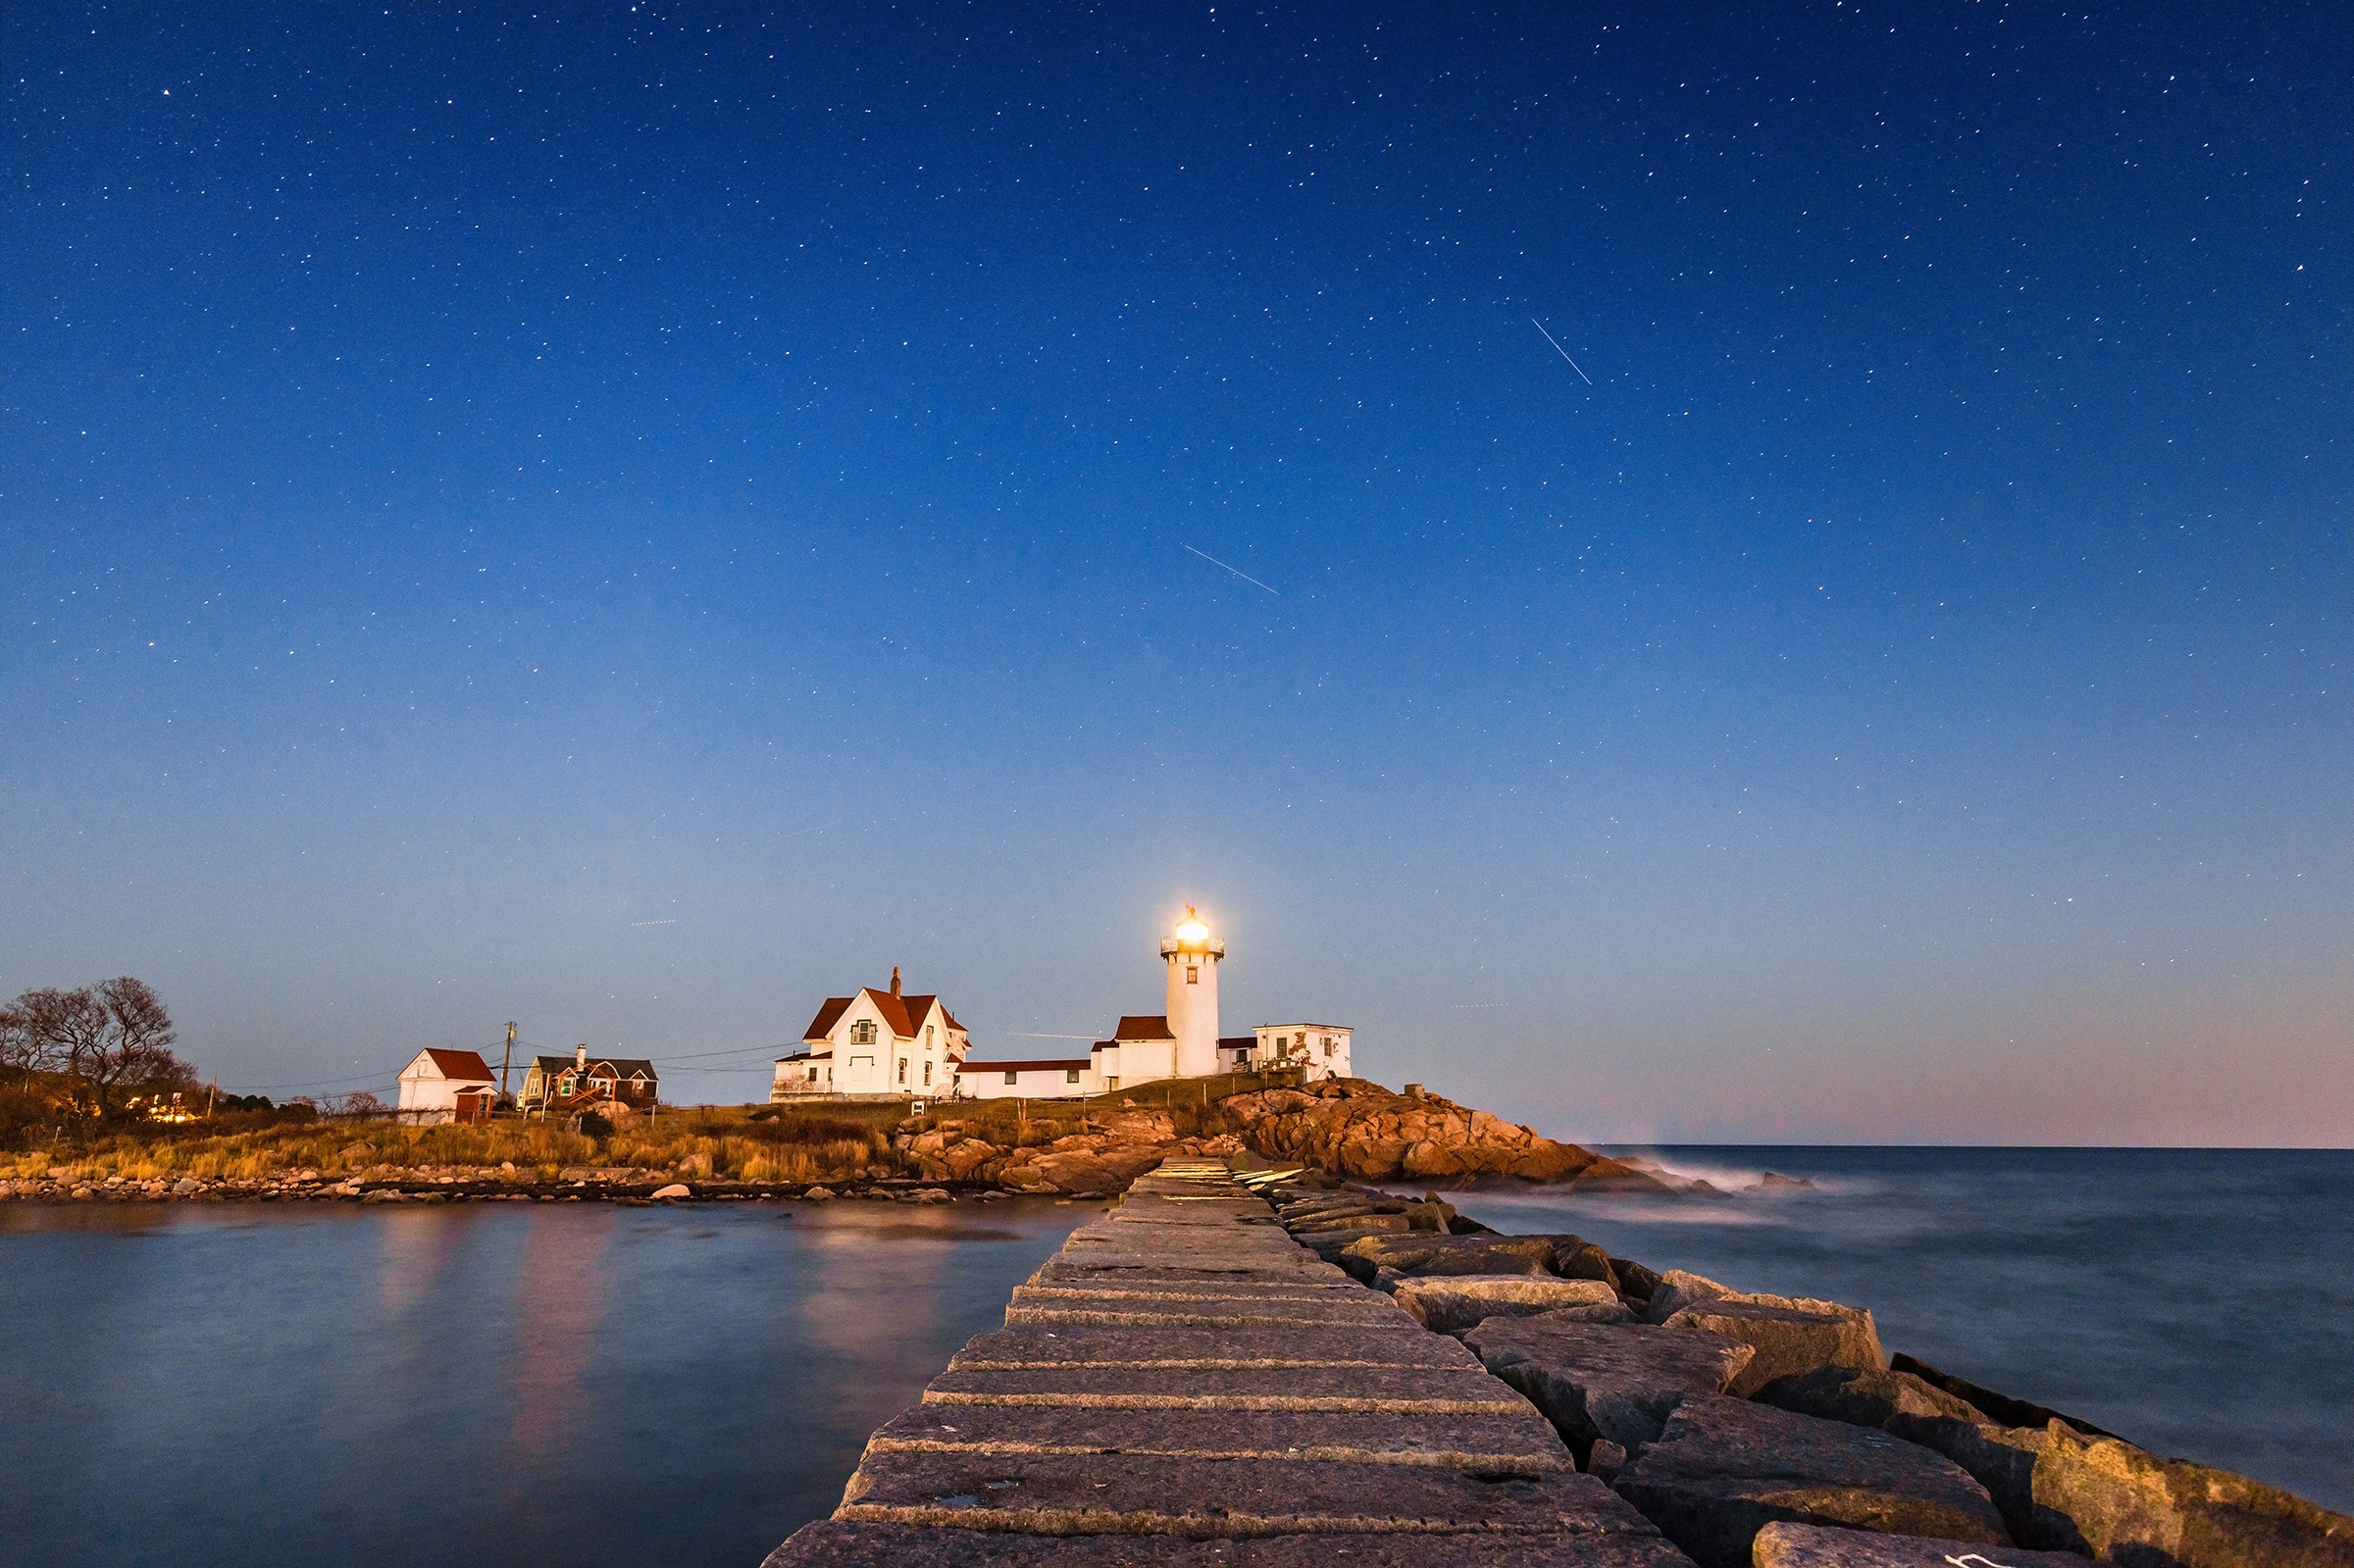 Eastern Point Lighthouse with stars